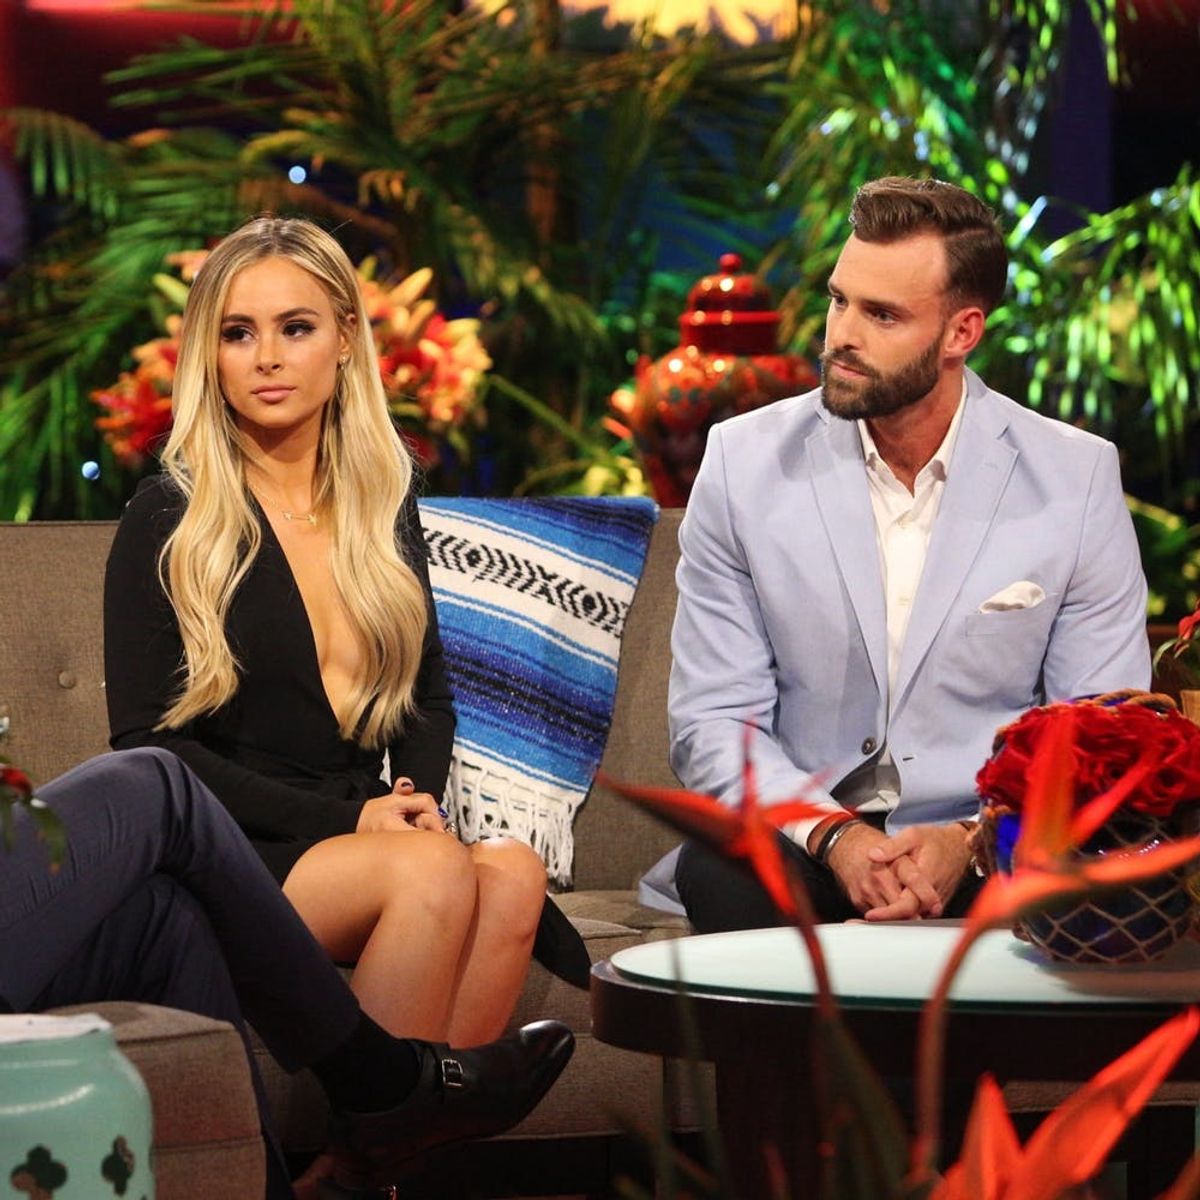 “Bachelor in Paradise’s” Amanda Stanton and Robby Hayes’ Split Is Getting Nasty